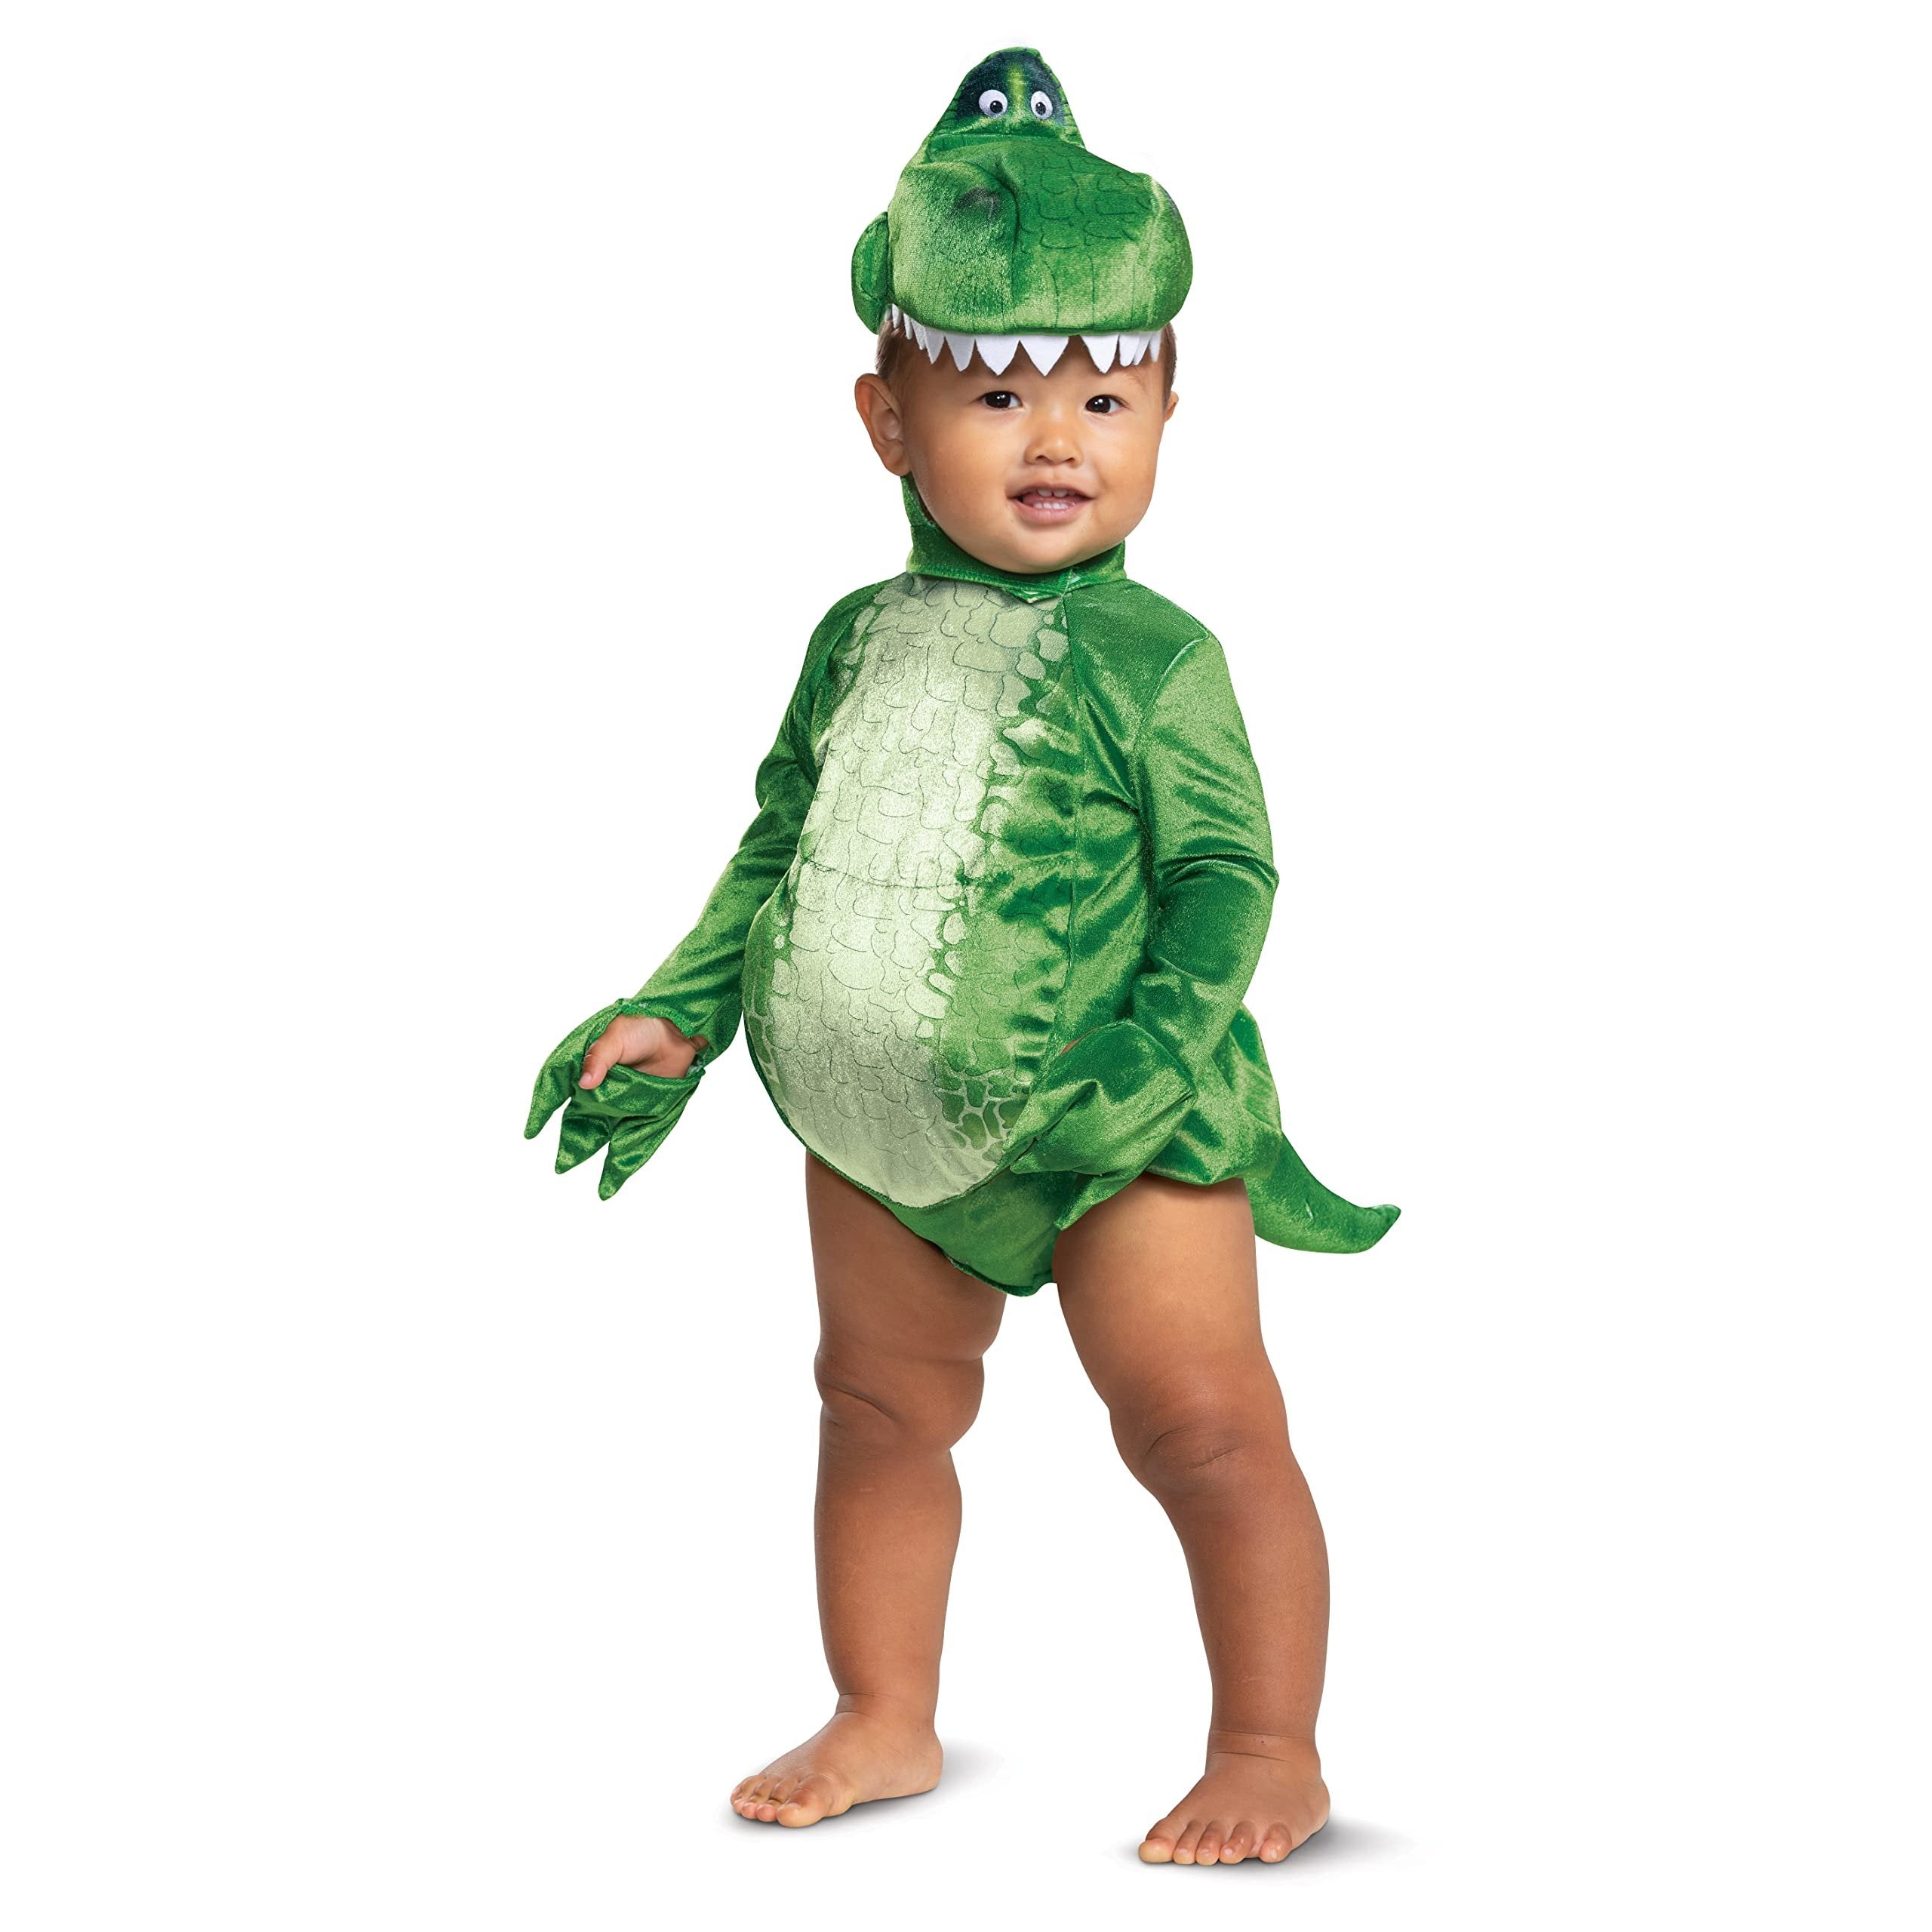 Disguise Baby Boys Disney Pixar Rex Toy Story 4 Infant And Toddler Costumes, Green, 6-12 Month US